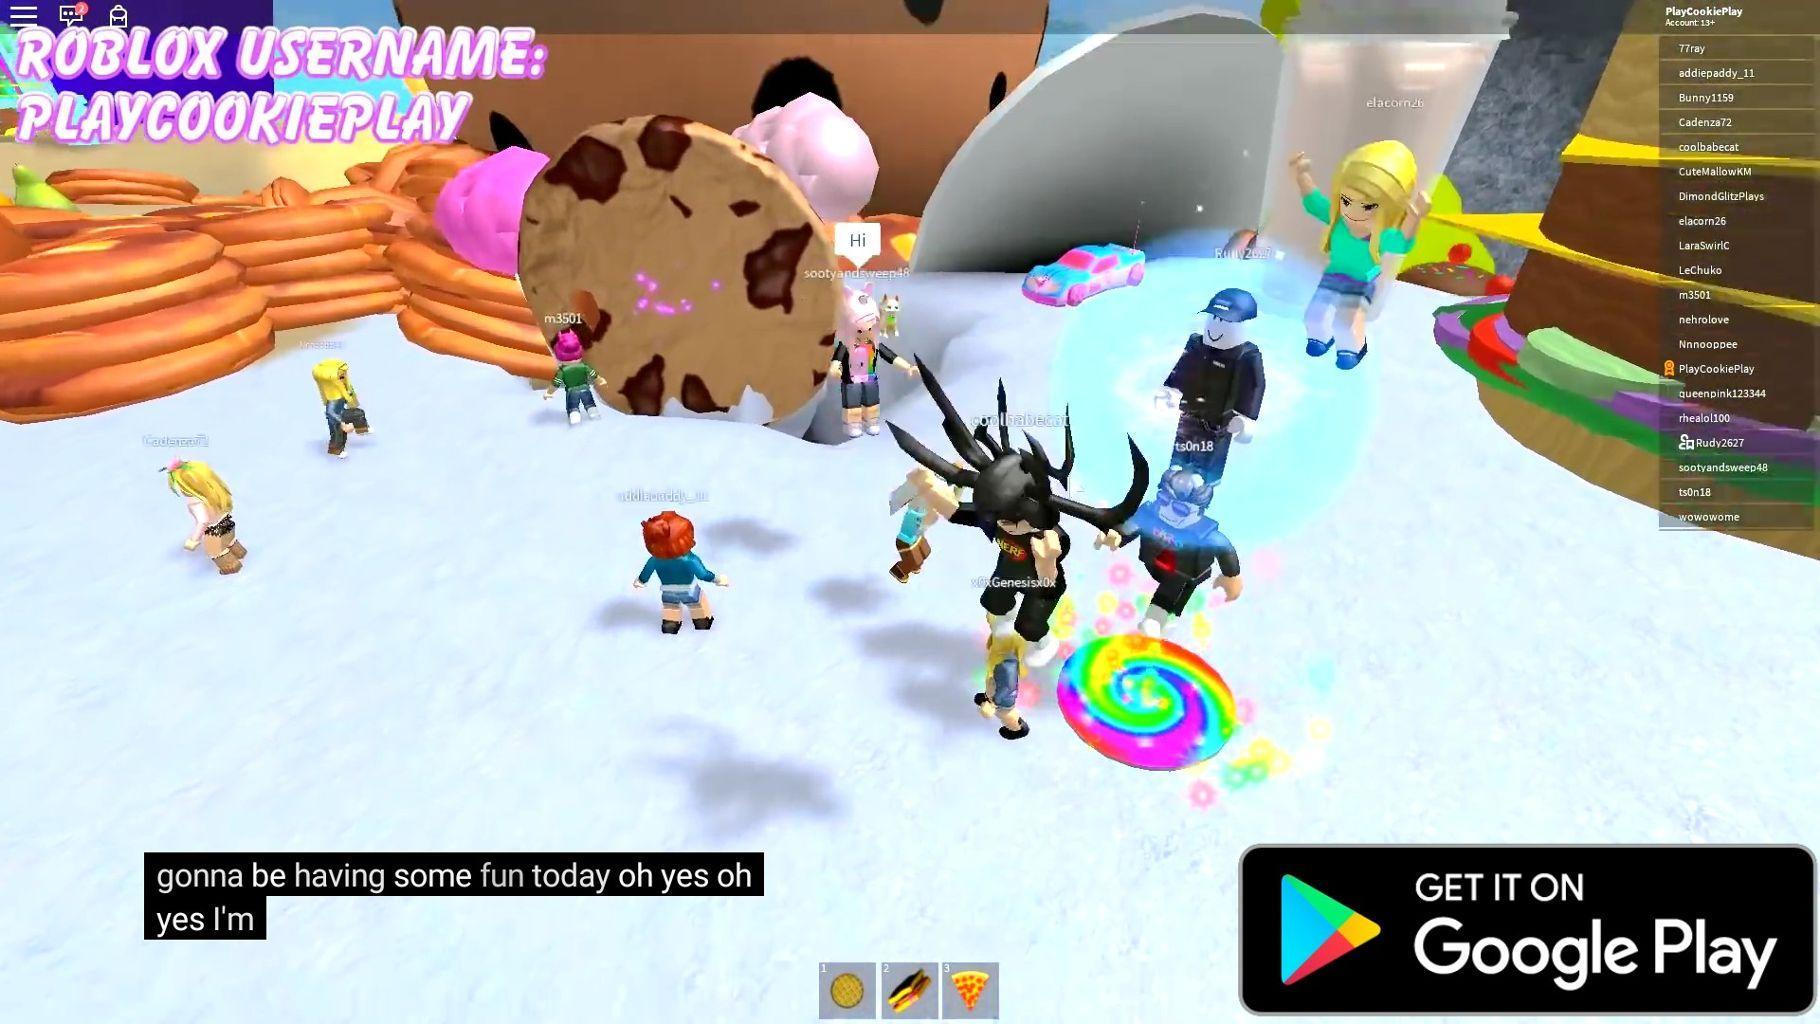 Guide For Cookie Swirl C Roblox For Android Apk Download - guide for cookie swirl c roblox girl apk download latest